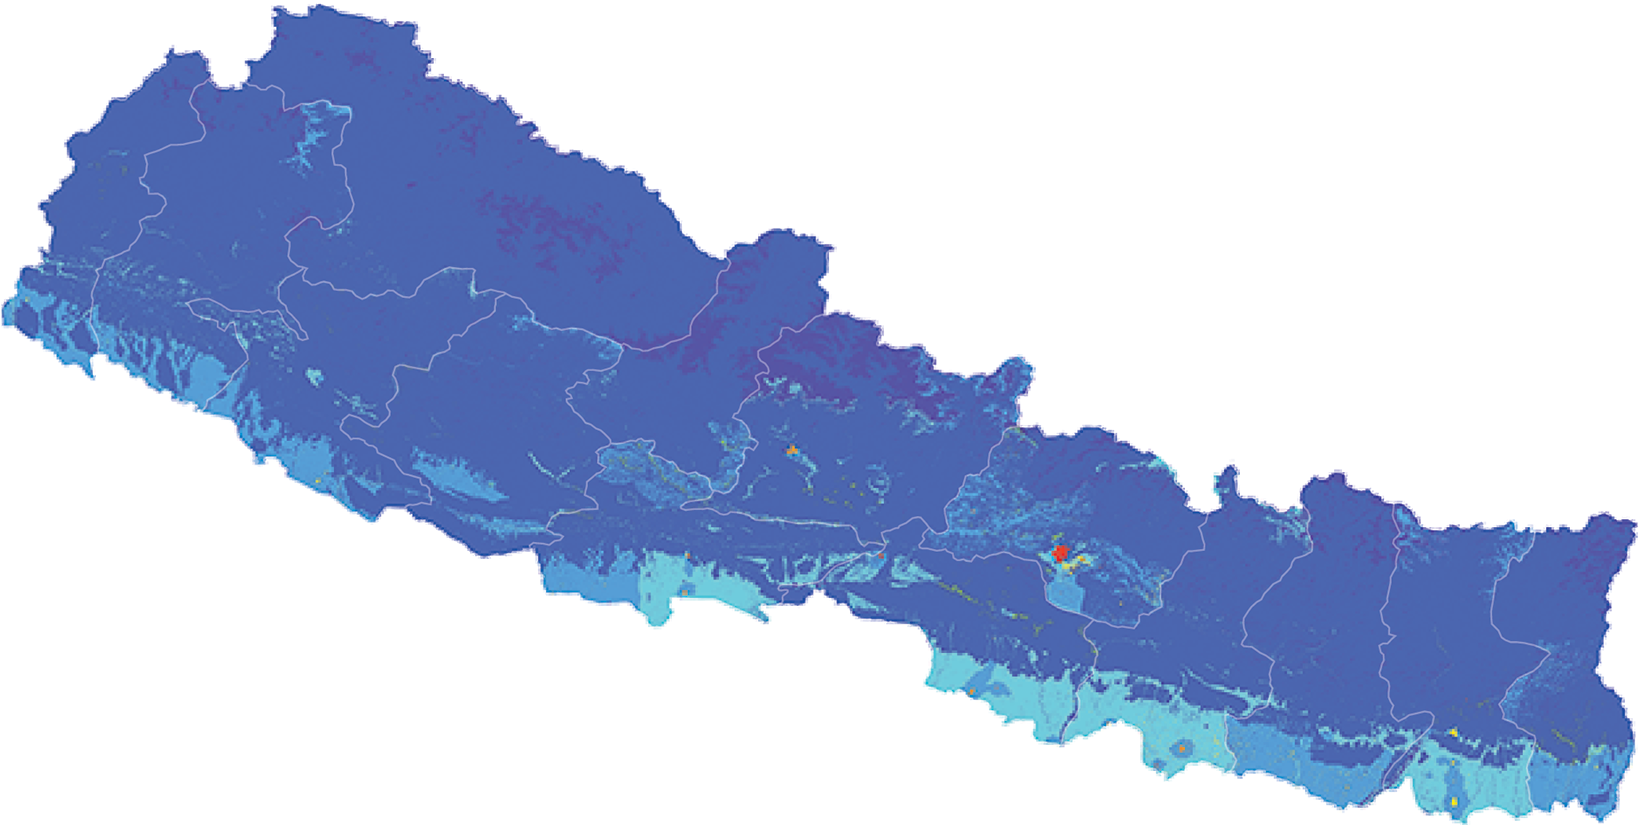 Nepal - Number and distribution of pregnancies (2012)